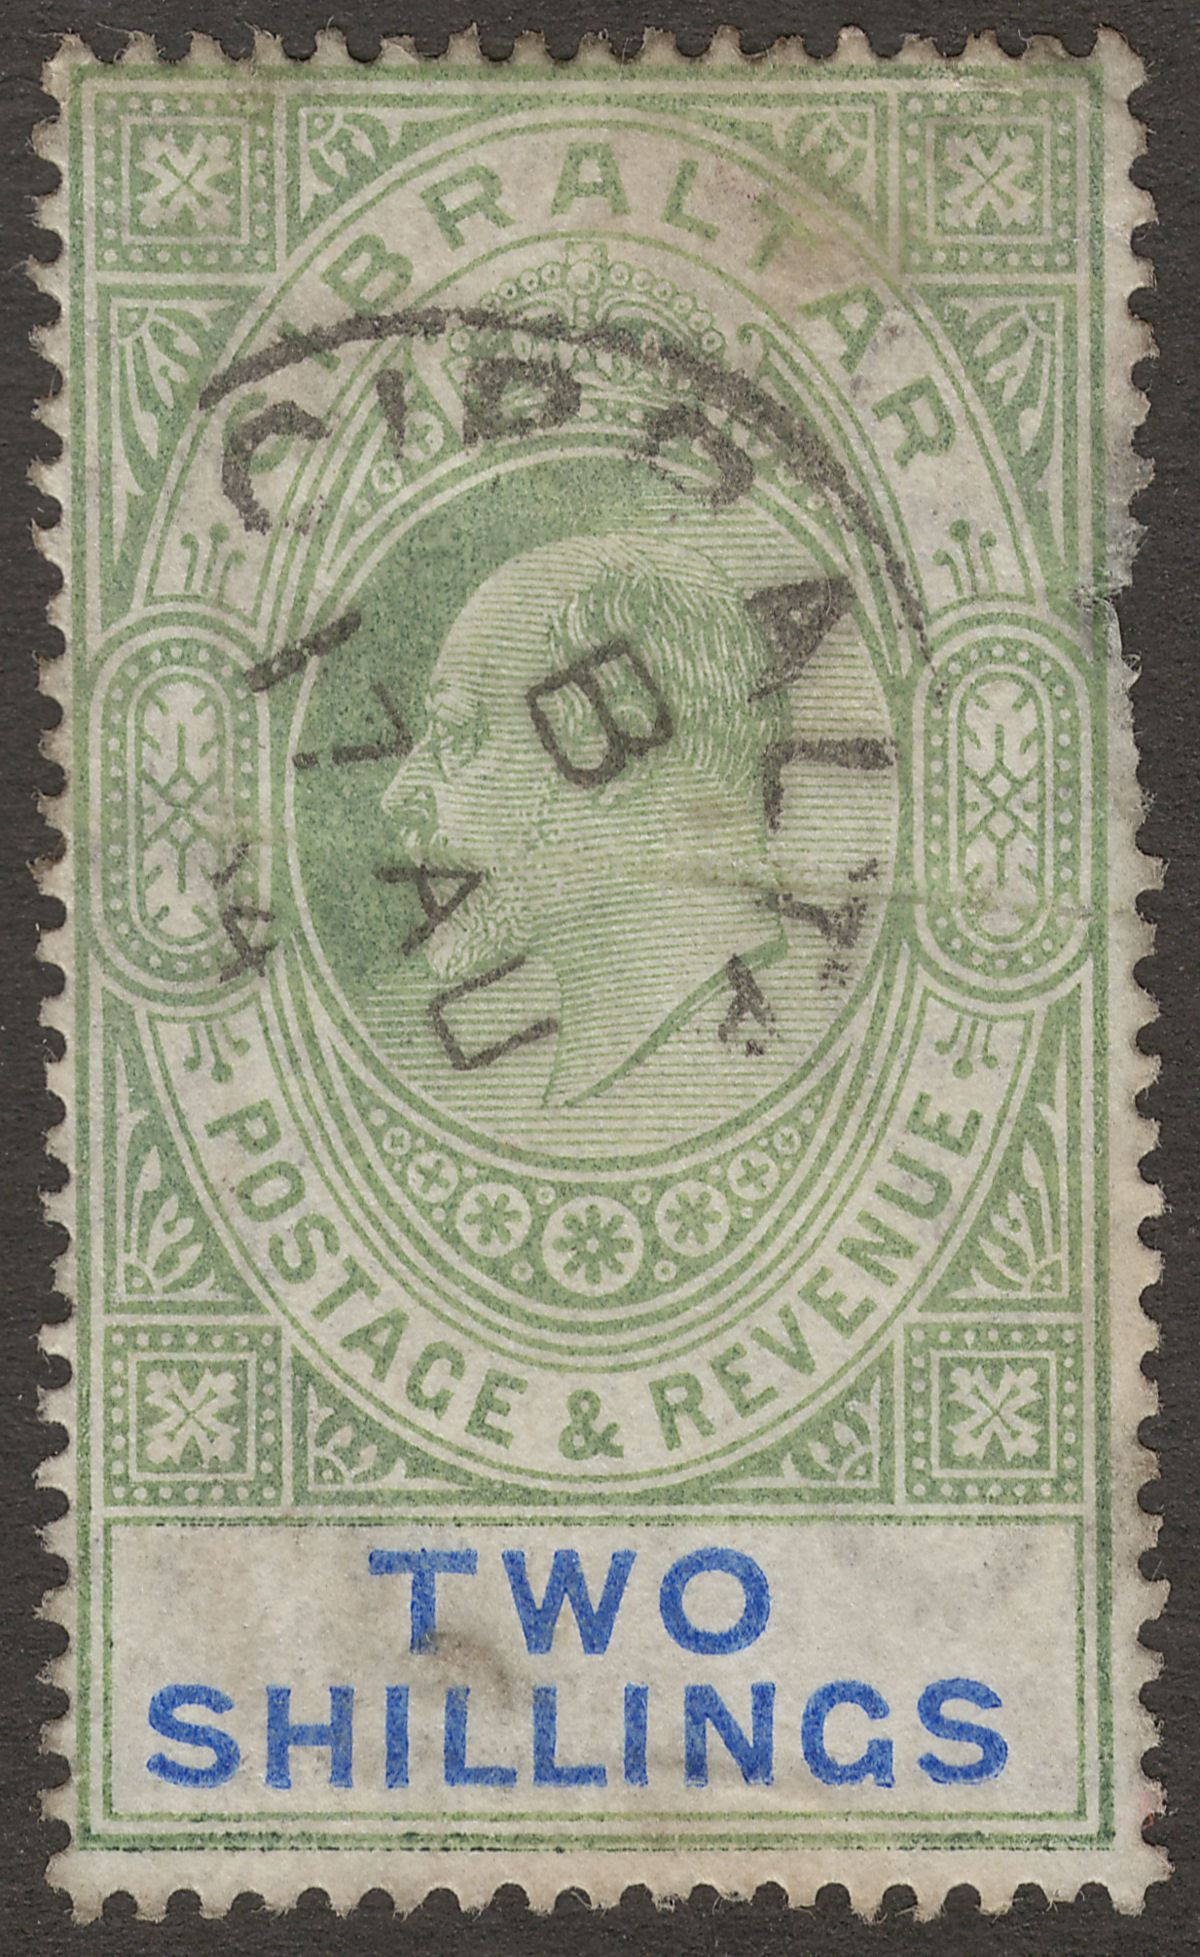 Gibraltar 1903 KEVII 2sh Green and Blue Used SG52 cat £275 Faults Spacefiller